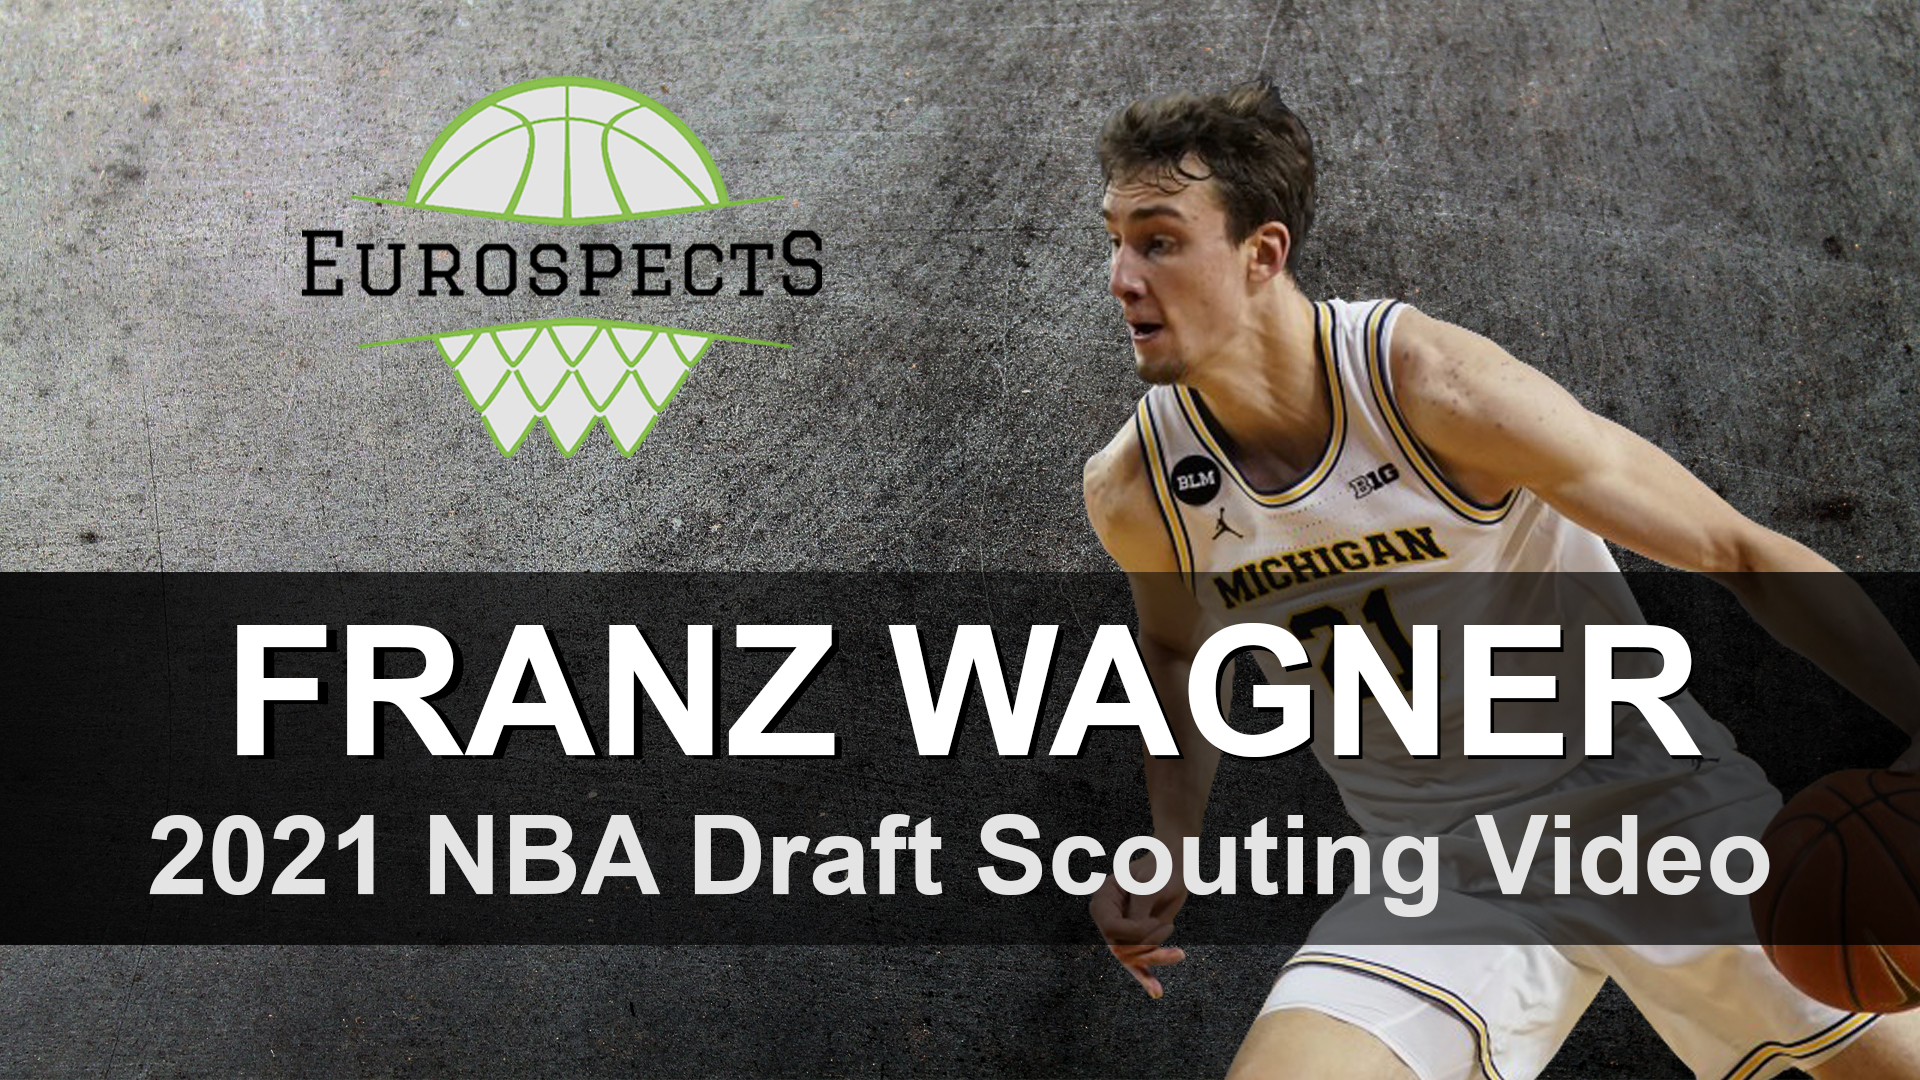 Franz Wagner – 2021 NBA Draft Scouting Video – Eurospects